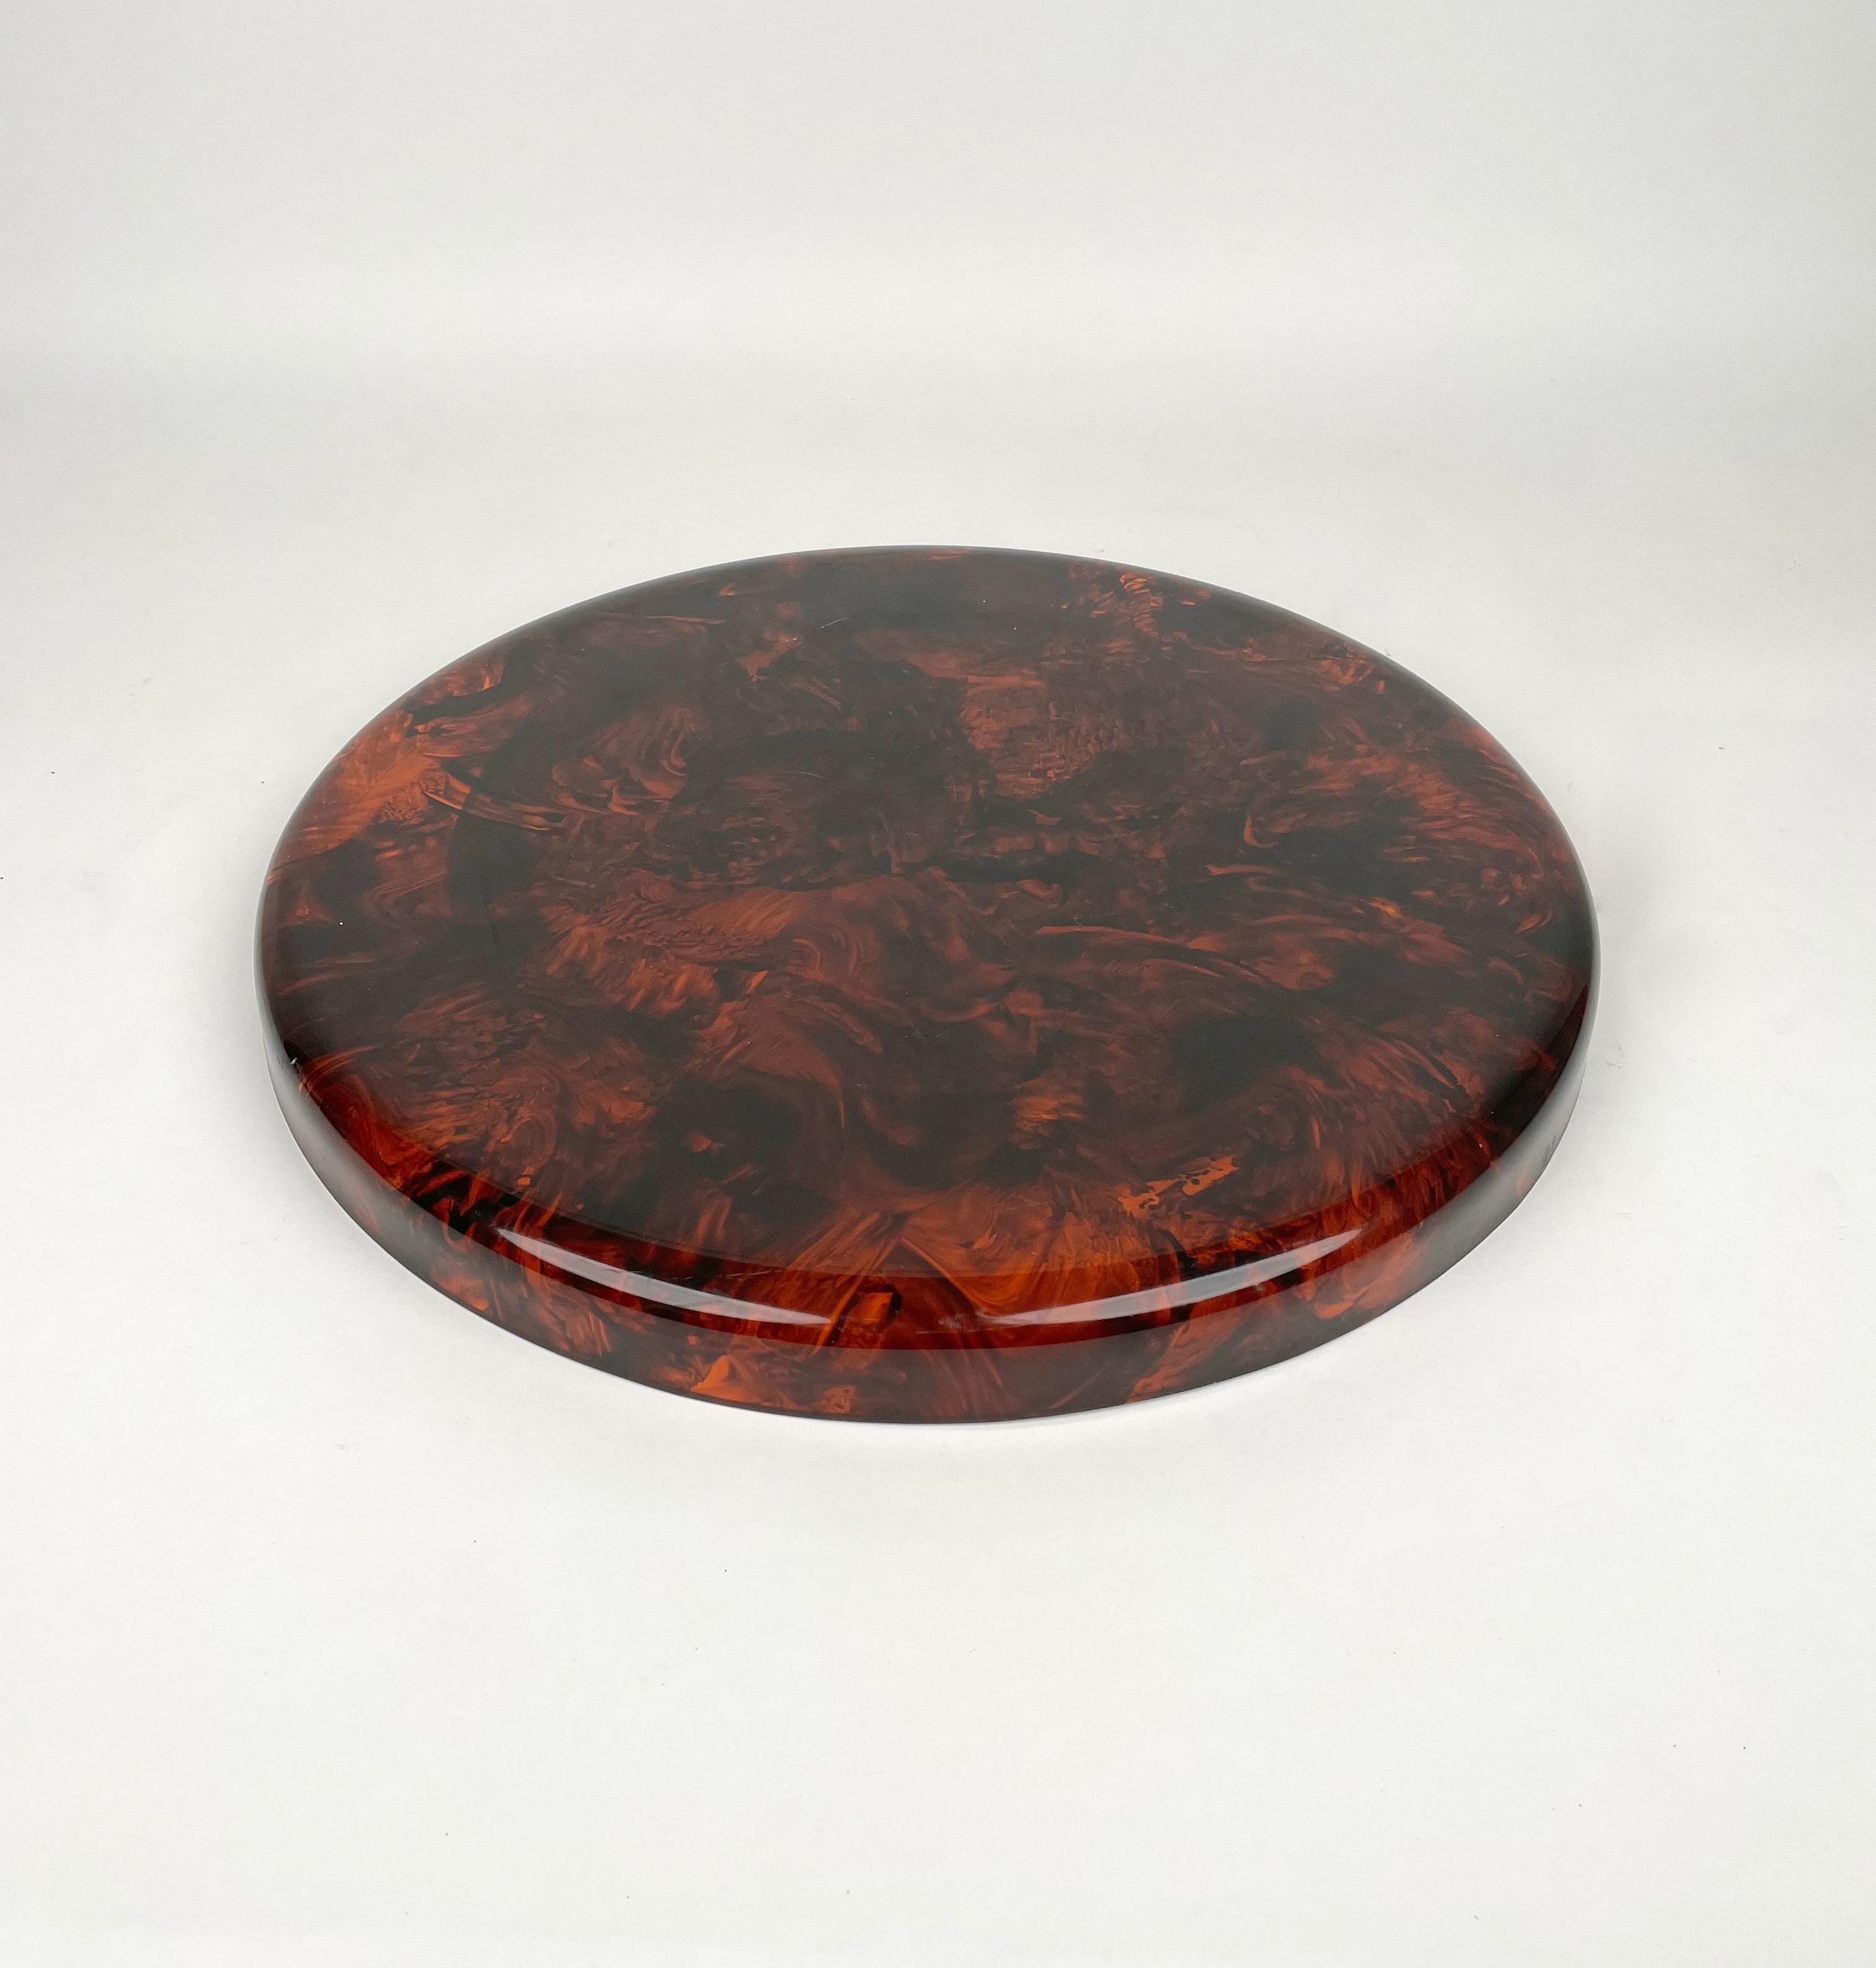 Round Centerpiece Serving Tray Lucite Tortoiseshell & Steel Italy 1970s For Sale 2